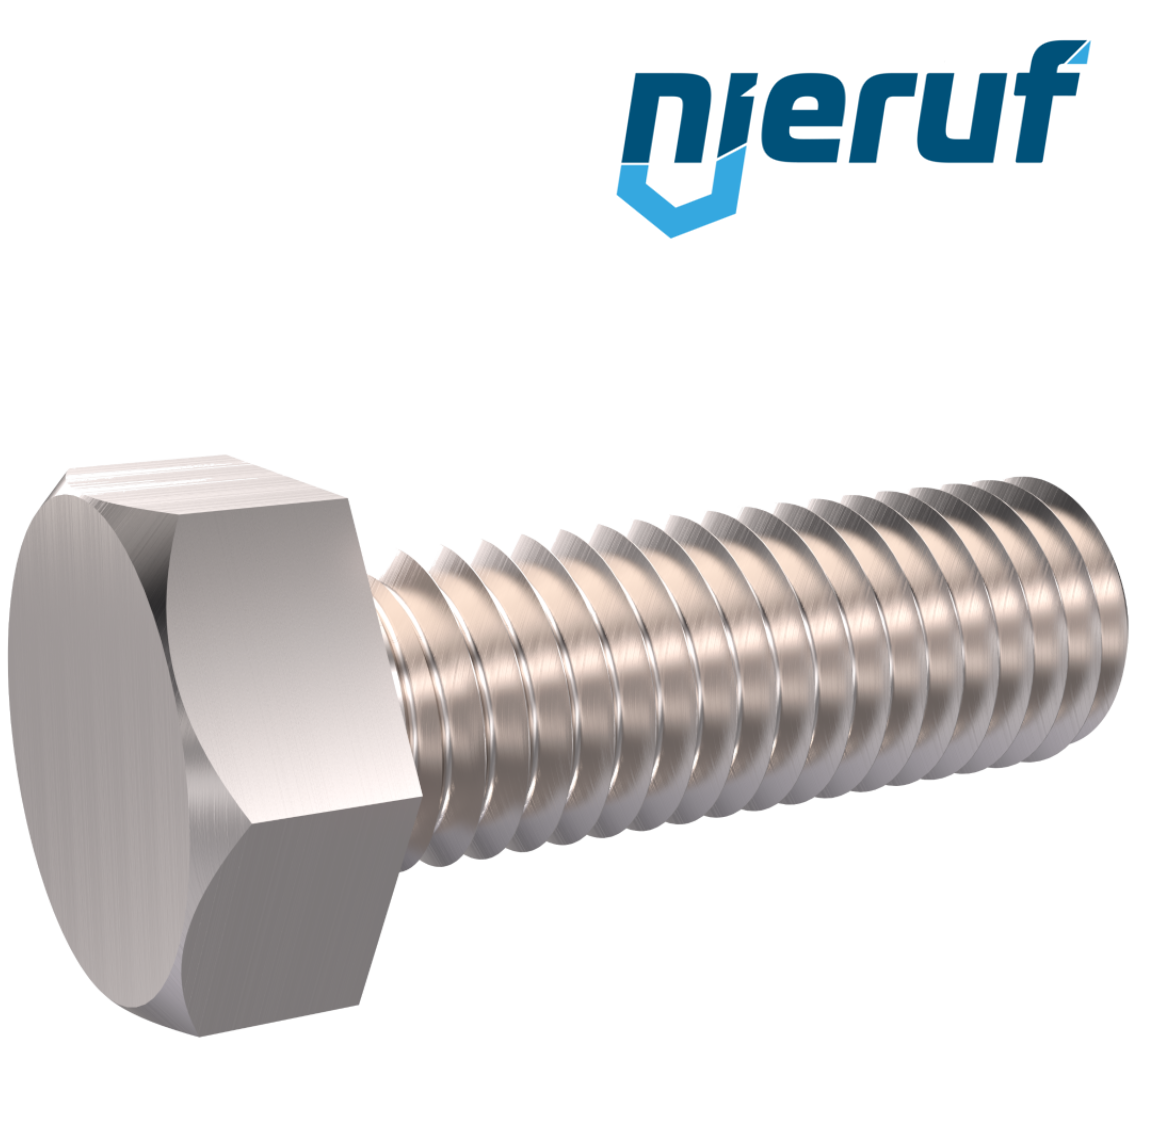 screw M24x90 mm stainless steel A2